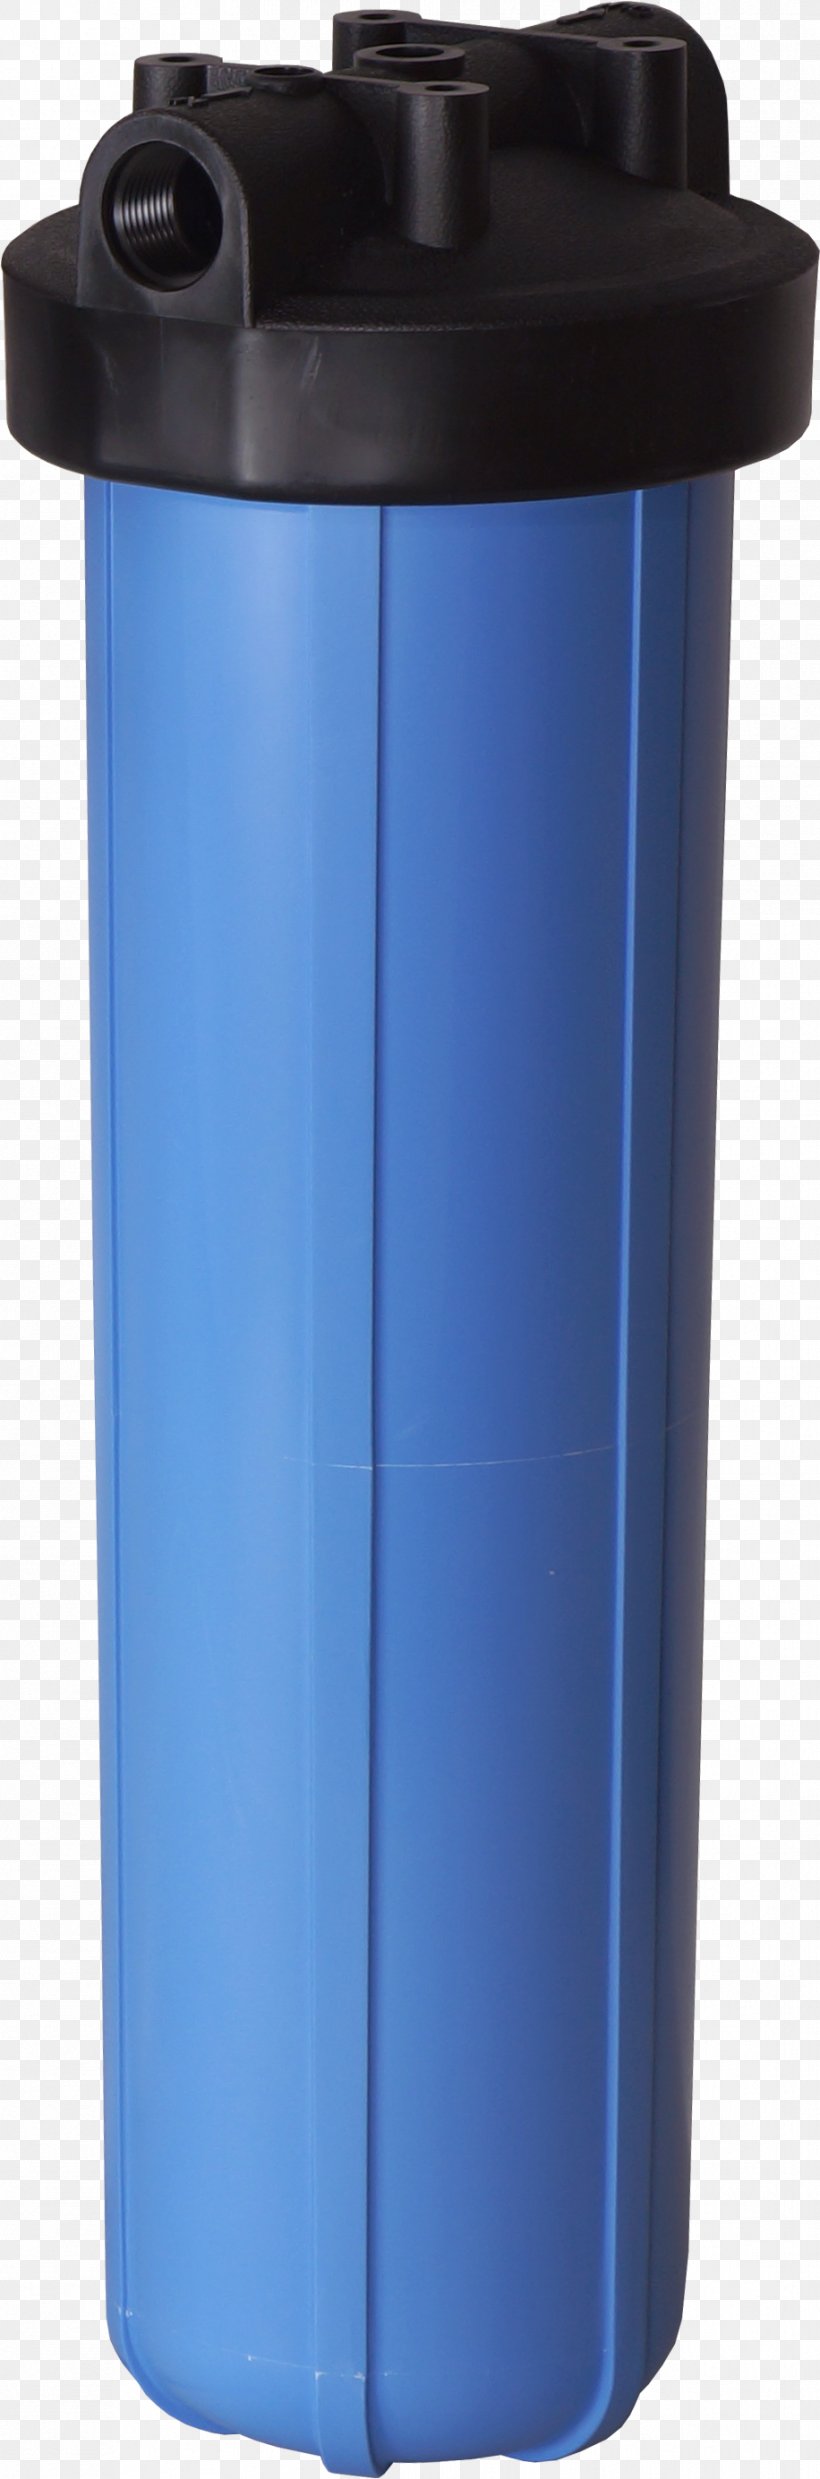 Water Filter Carbon Filtering Filtration Water Purification, PNG, 916x2770px, Water Filter, Big Berkey Water Filters, Blue, Carbon Filtering, Cylinder Download Free